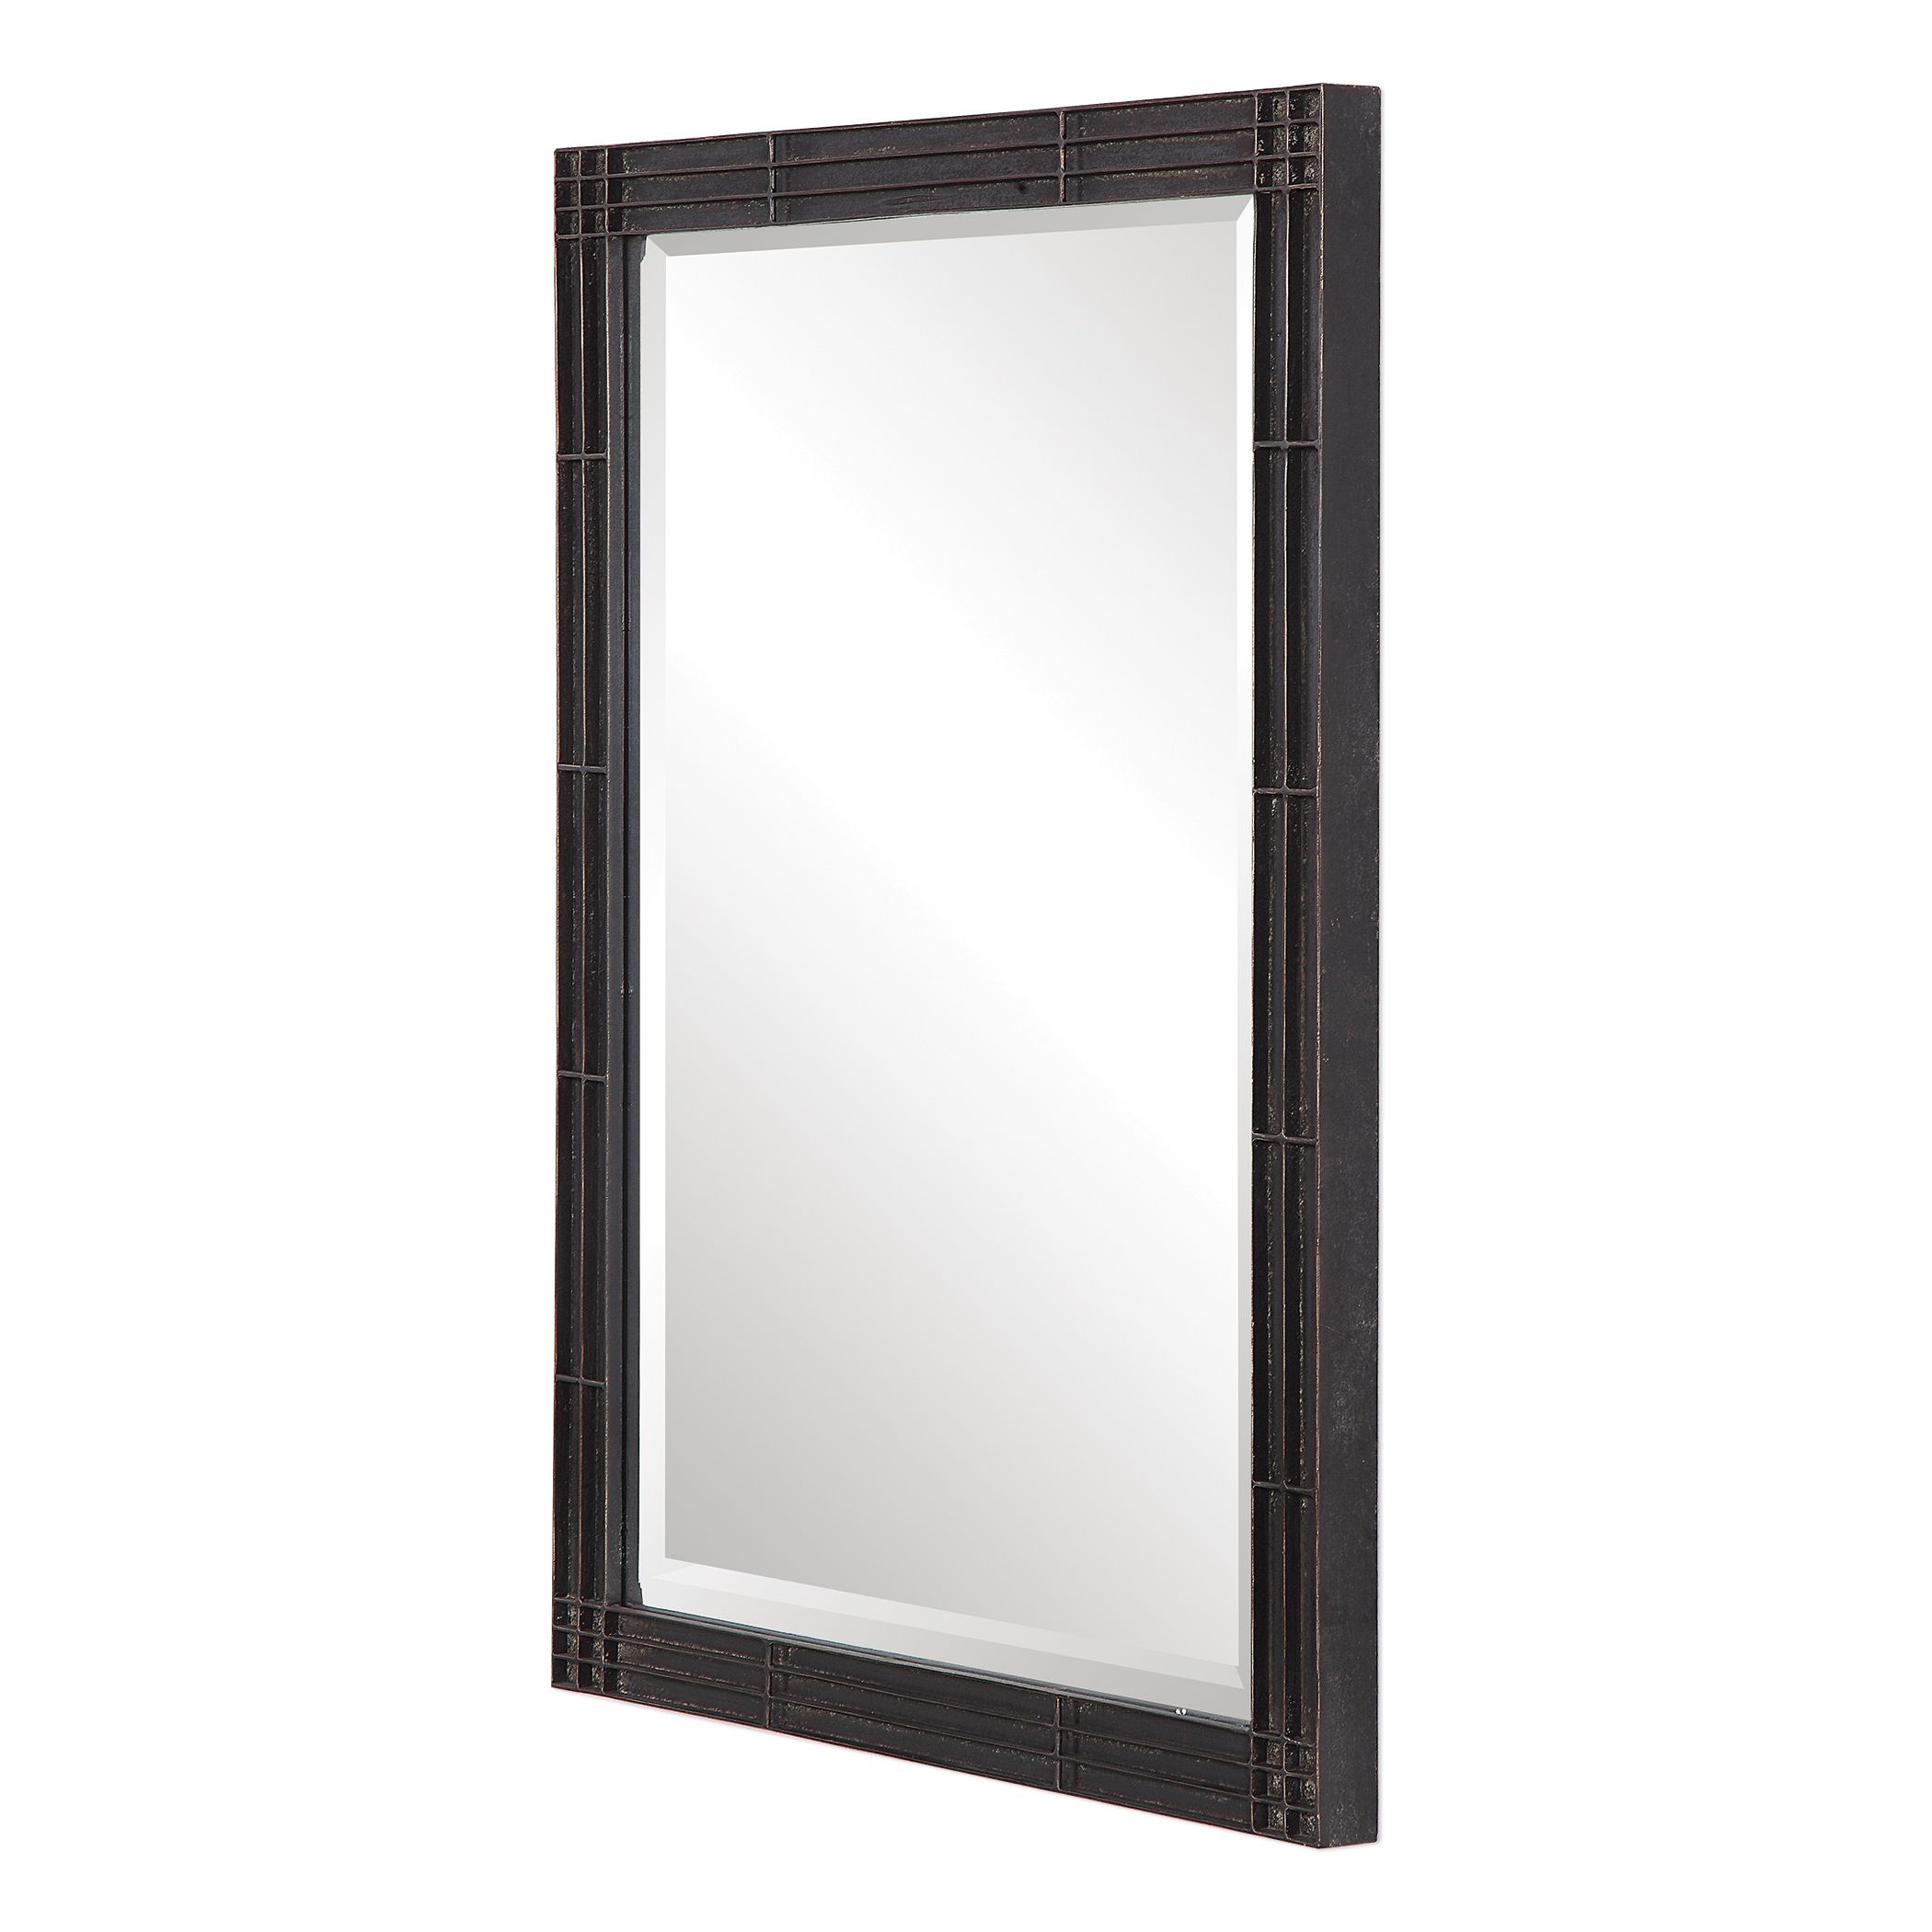 35" Geometric Vanity Metal Intended For Recent Metallic Silver Wall Mirrors (View 8 of 15)